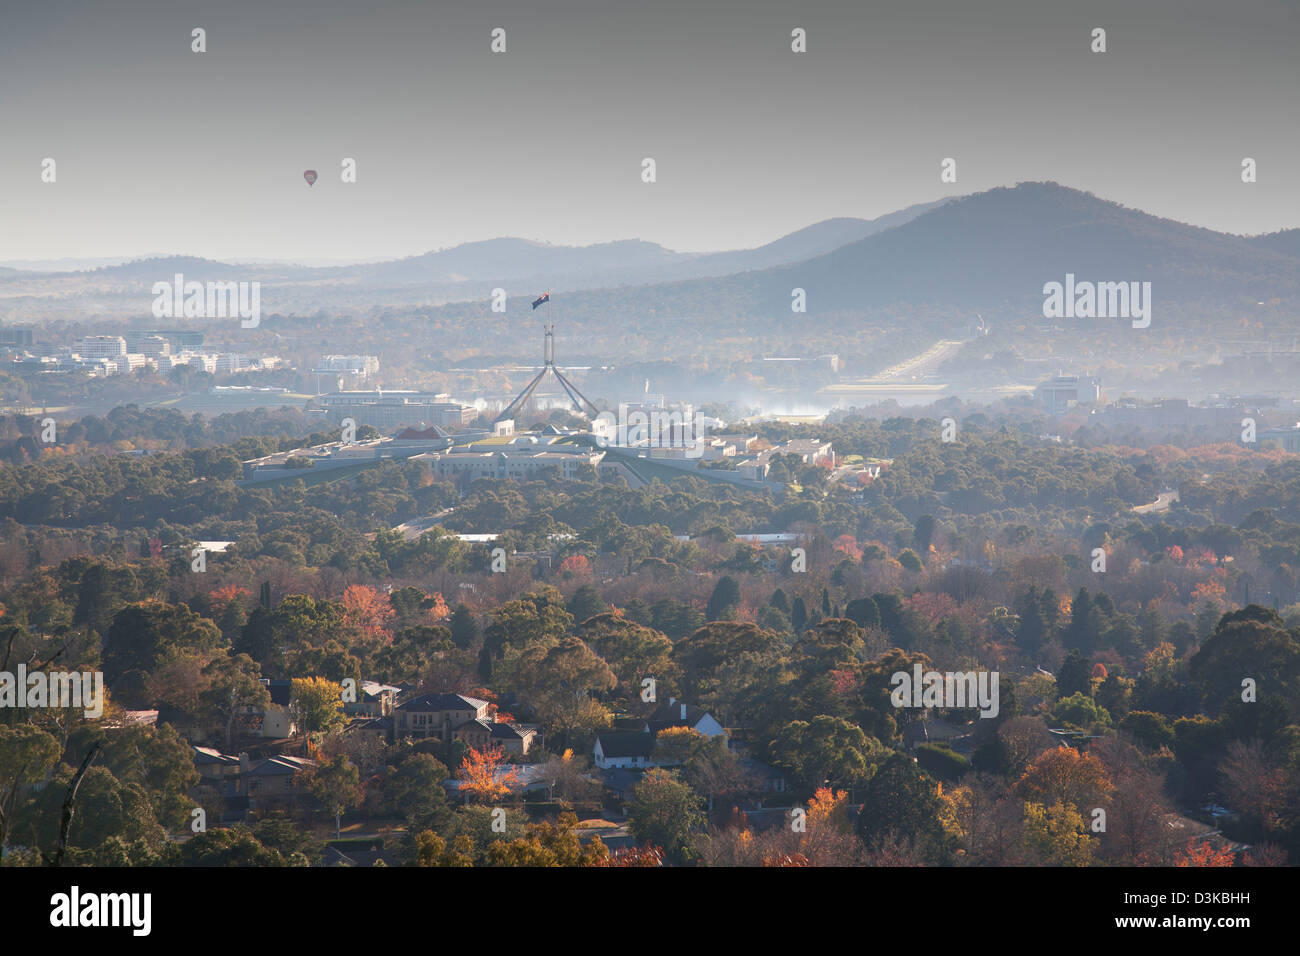 Tourist Hot Air Balloon over Lake Burley Griffin and Parliament House Canberra Australia Stock Photo